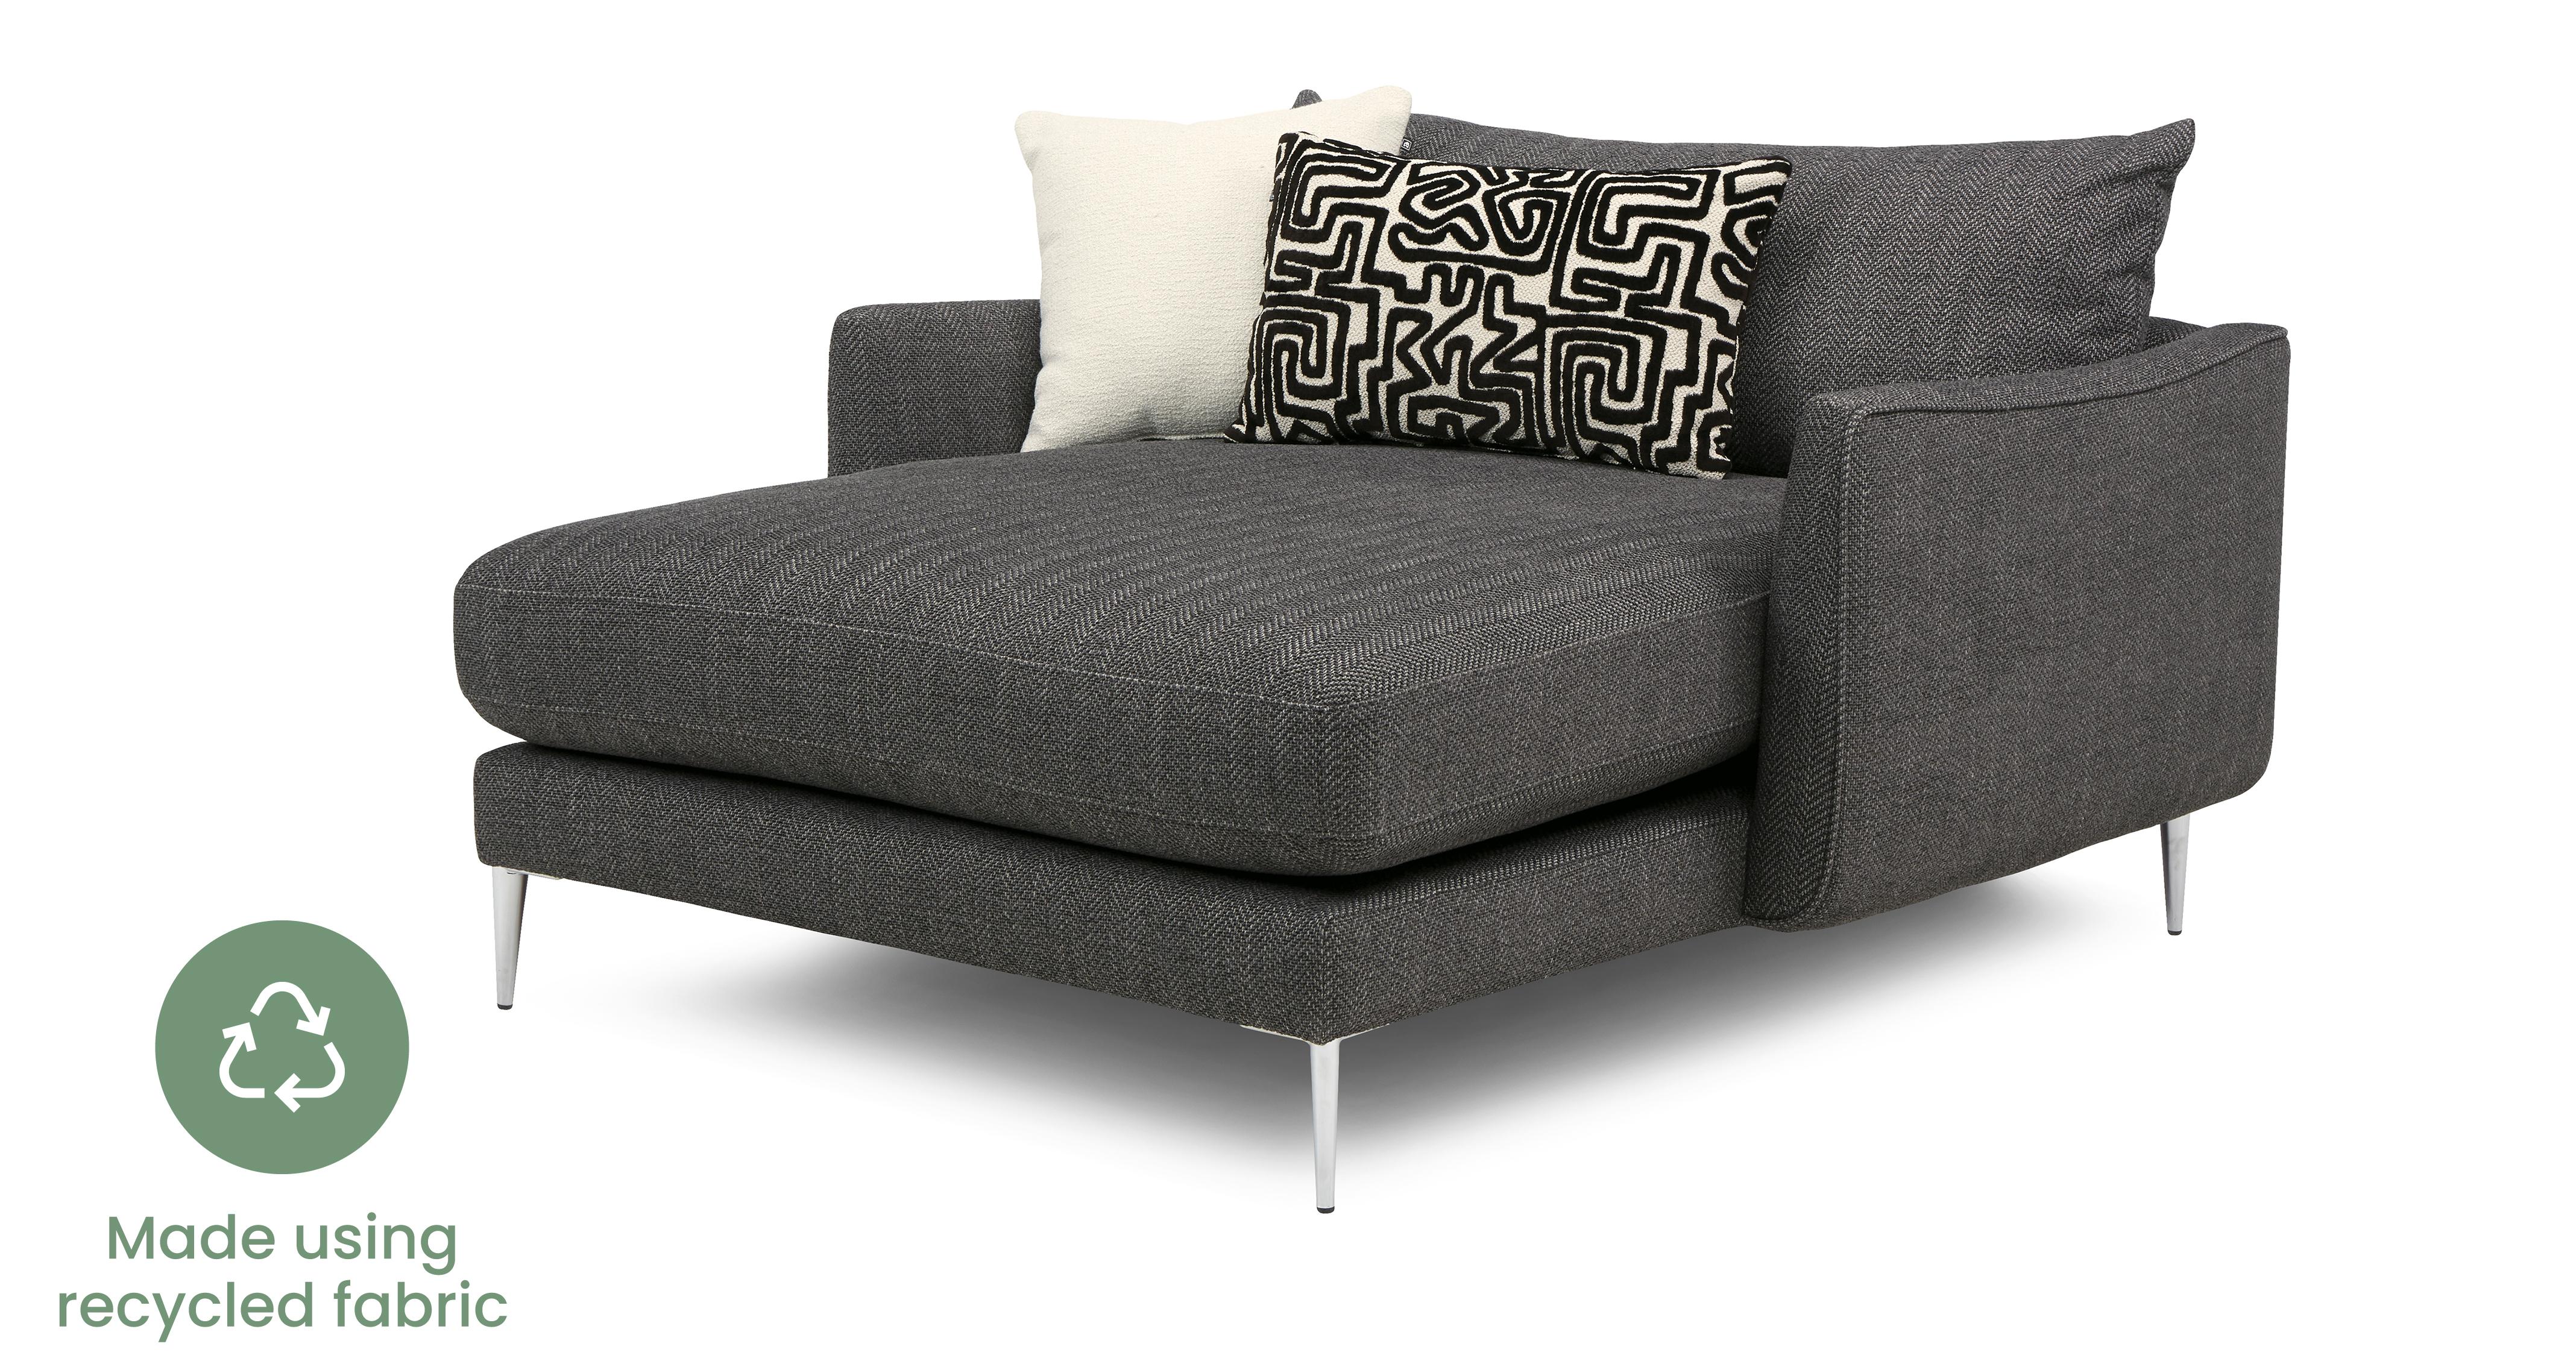 Gowans Chaise Lounge Three Posts Fabric: Pewter Grey Linen